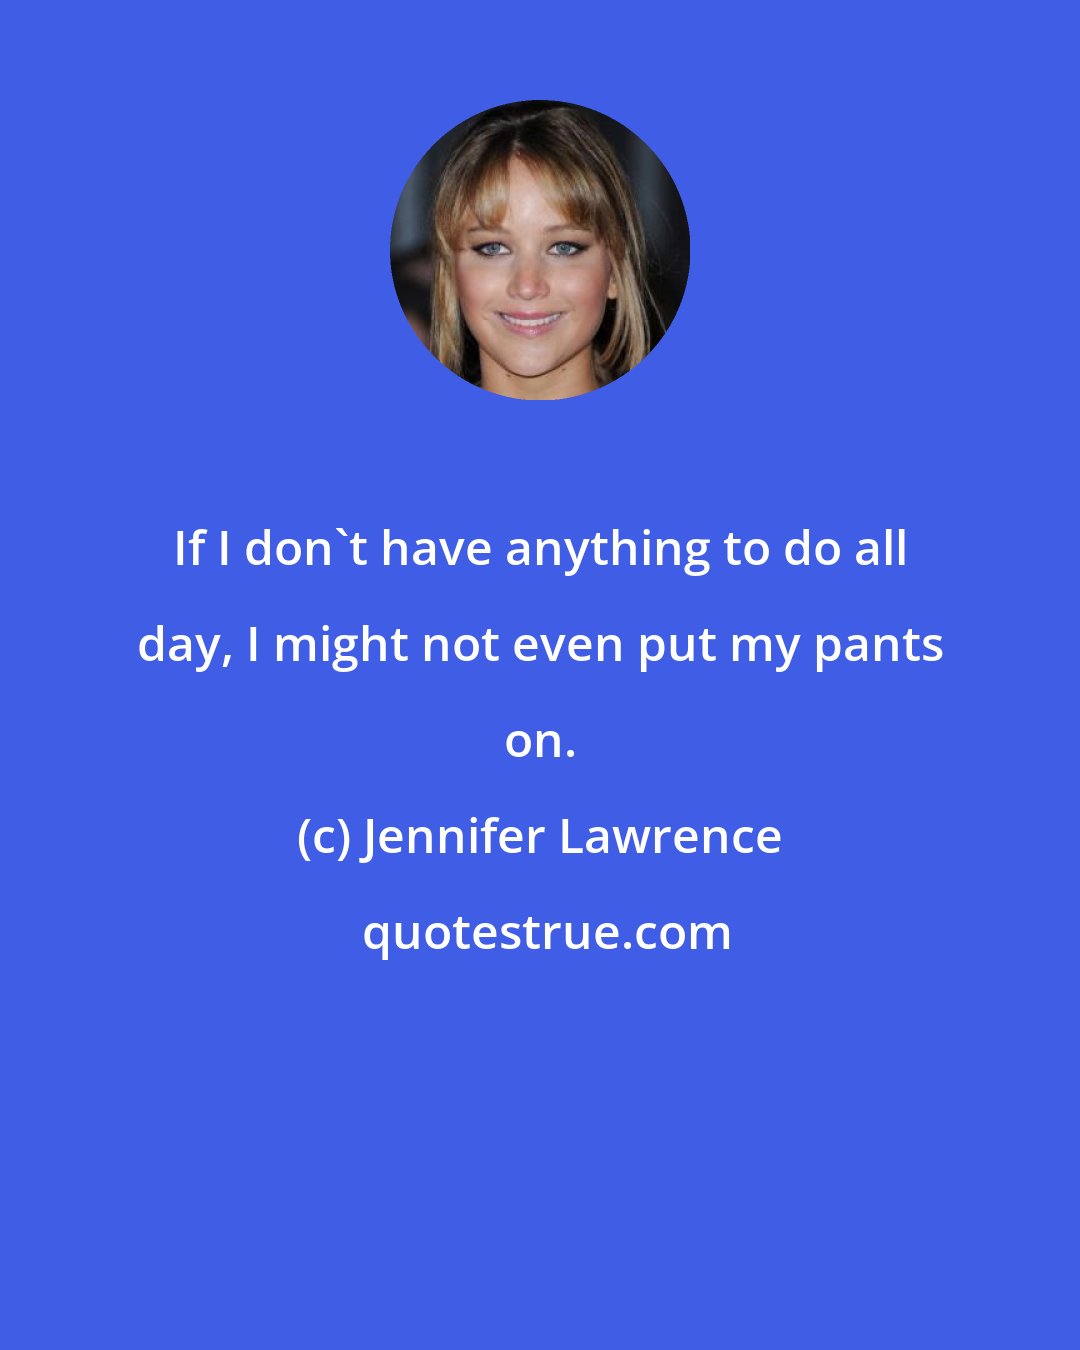 Jennifer Lawrence: If I don't have anything to do all day, I might not even put my pants on.